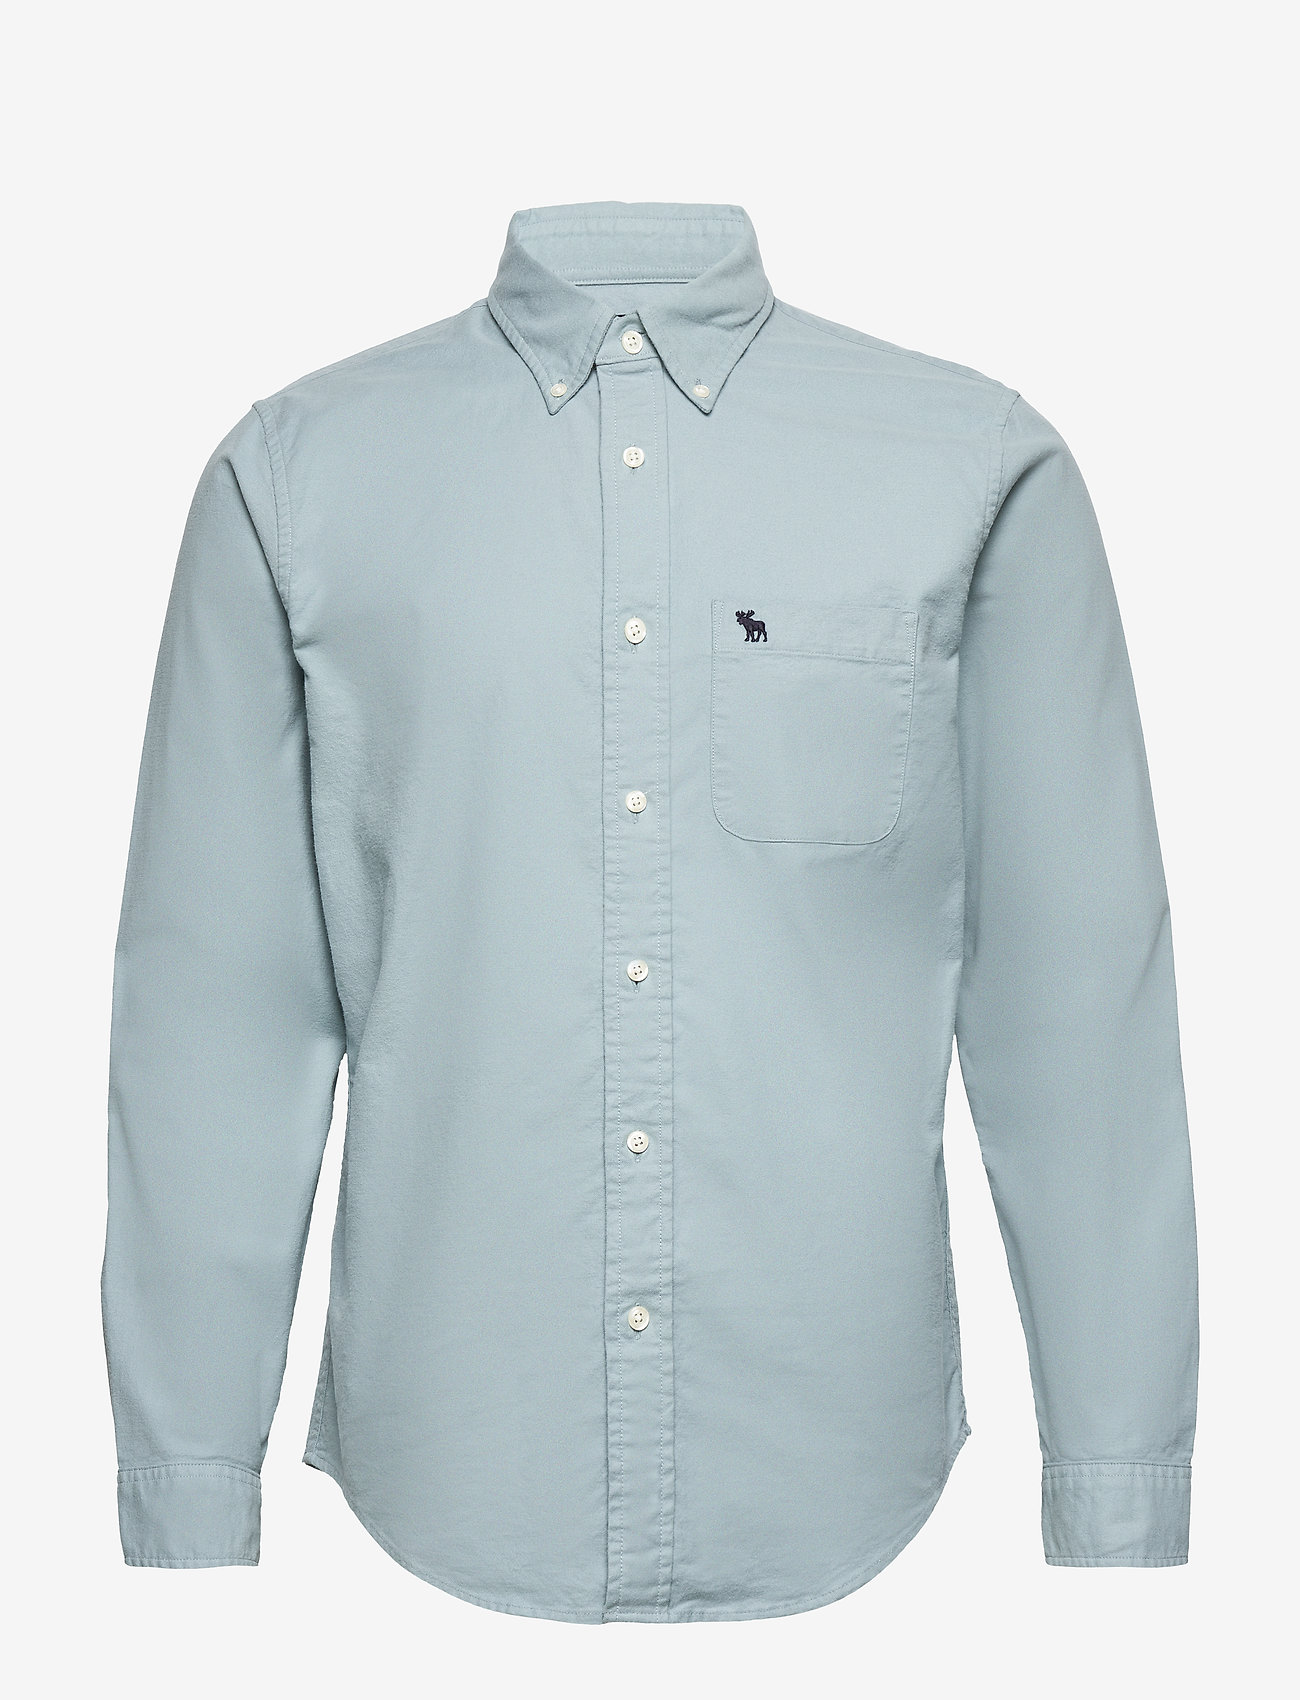 abercrombie and fitch casual shirts